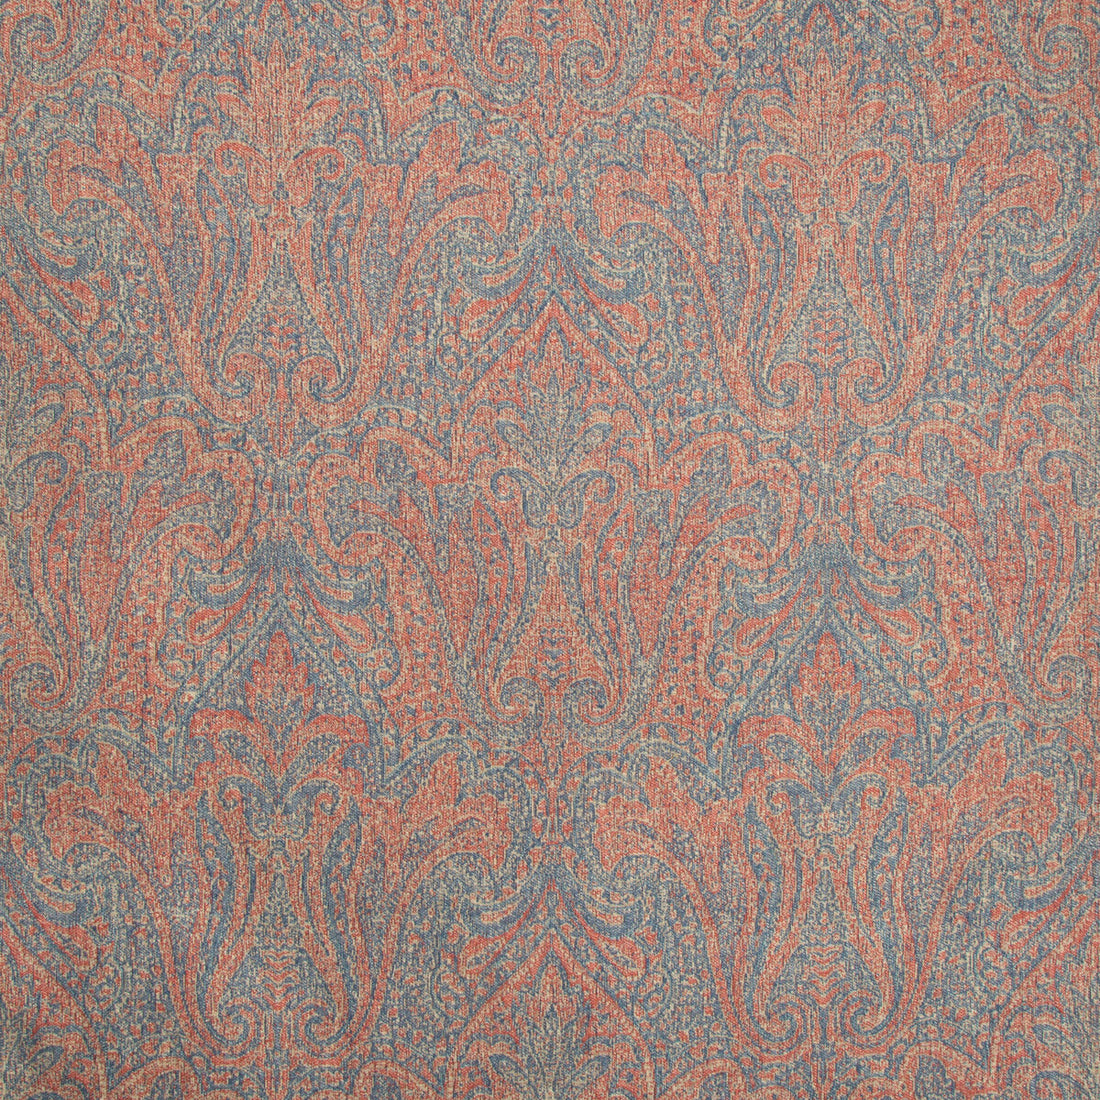 Toccoa Paisley fabric in ruby/blue color - pattern 2017126.519.0 - by Lee Jofa in the Lodge II Weaves And Embroideries collection